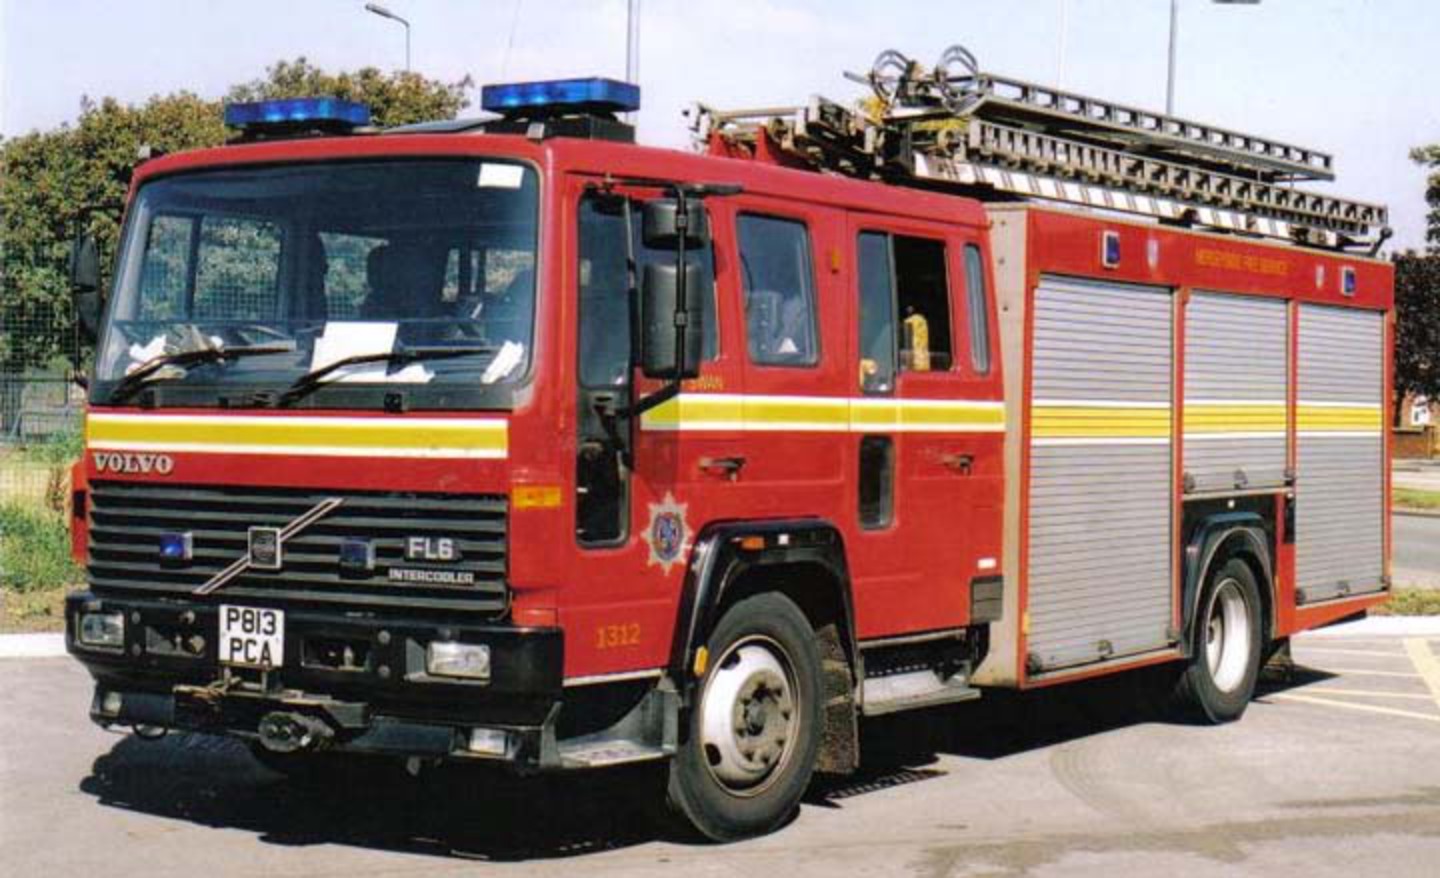 Volvo FL6.14/Saxon - Water Ladder Purchased in 1997, this is a one-off